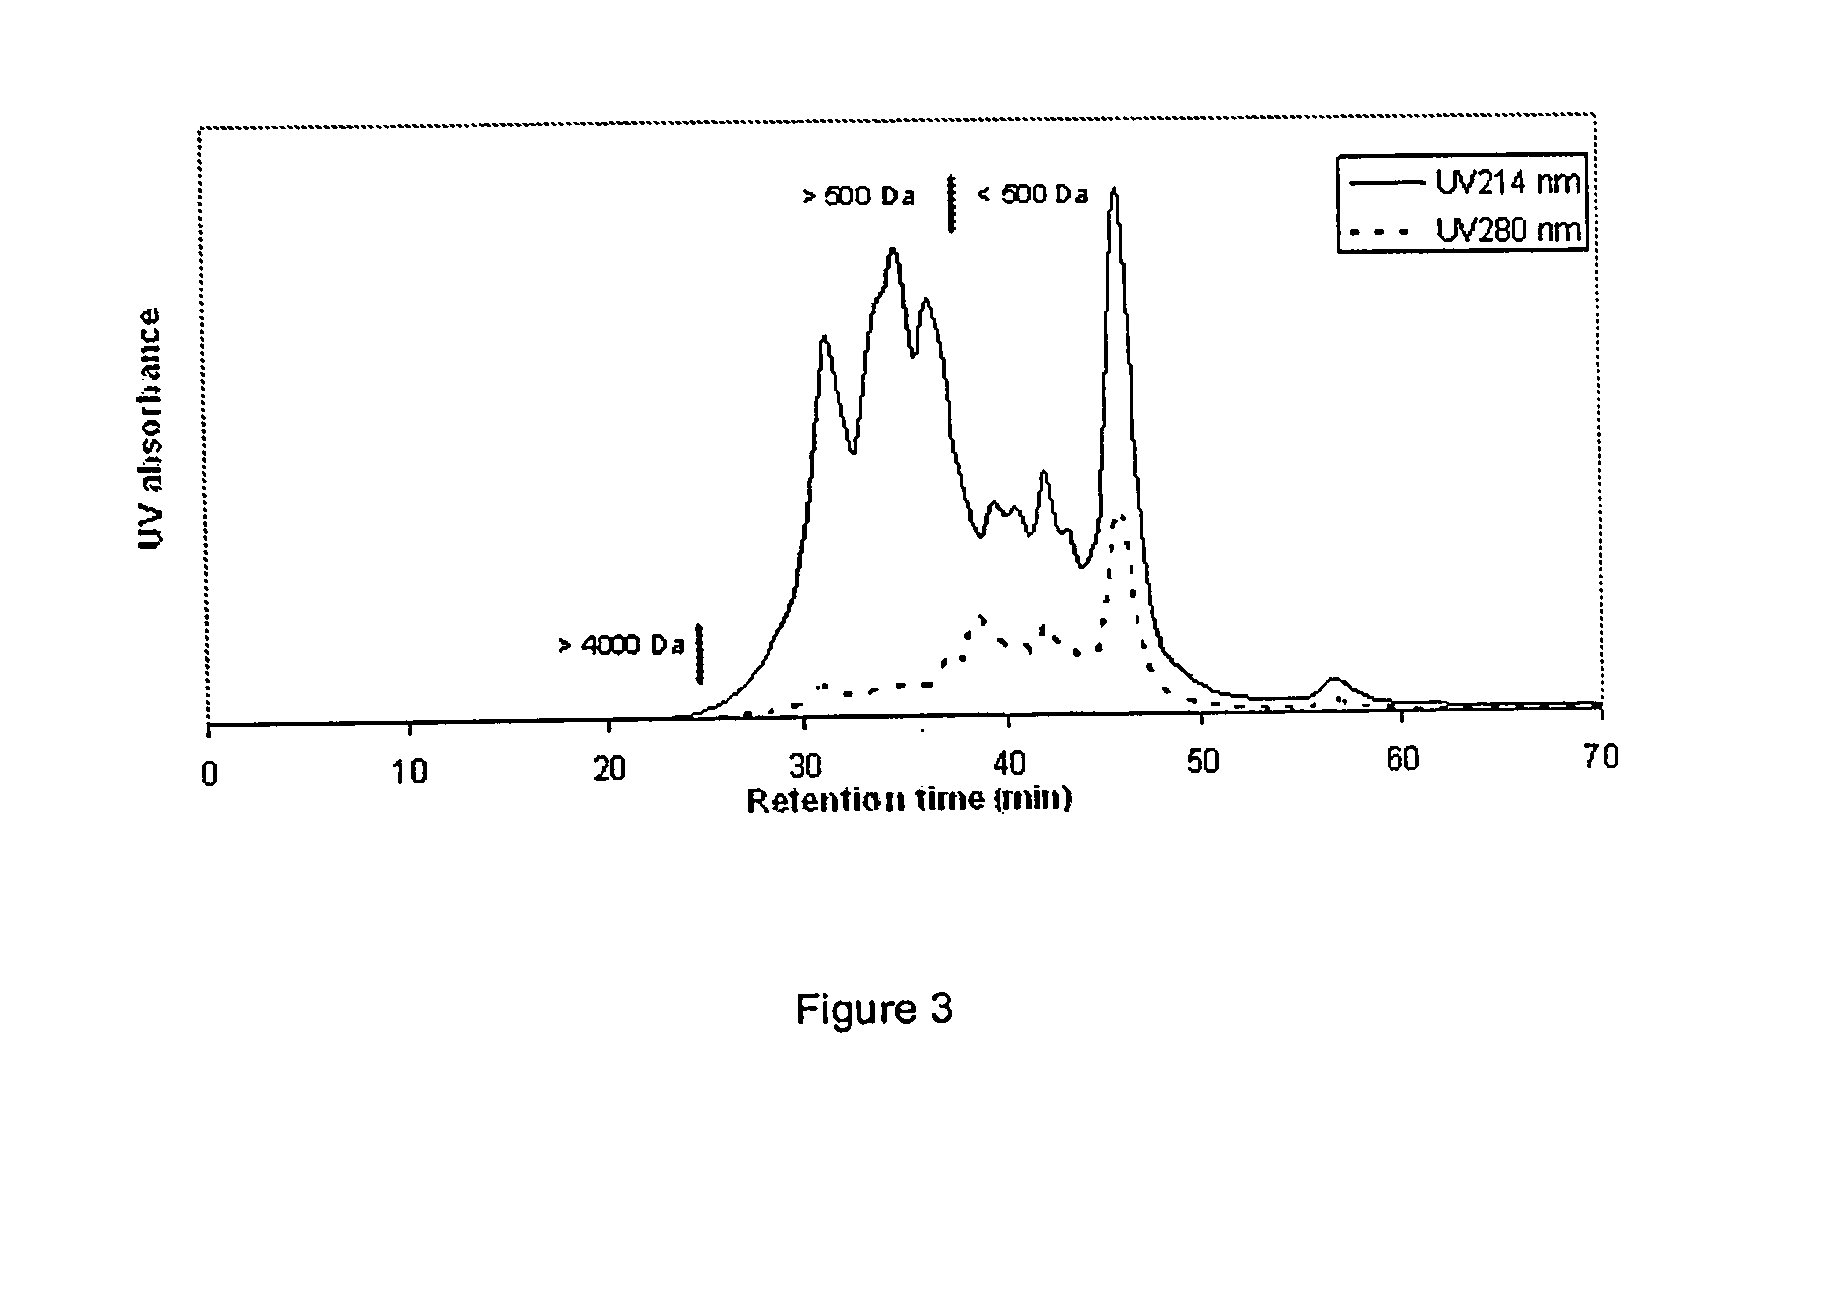 Peptides containing tryptophan